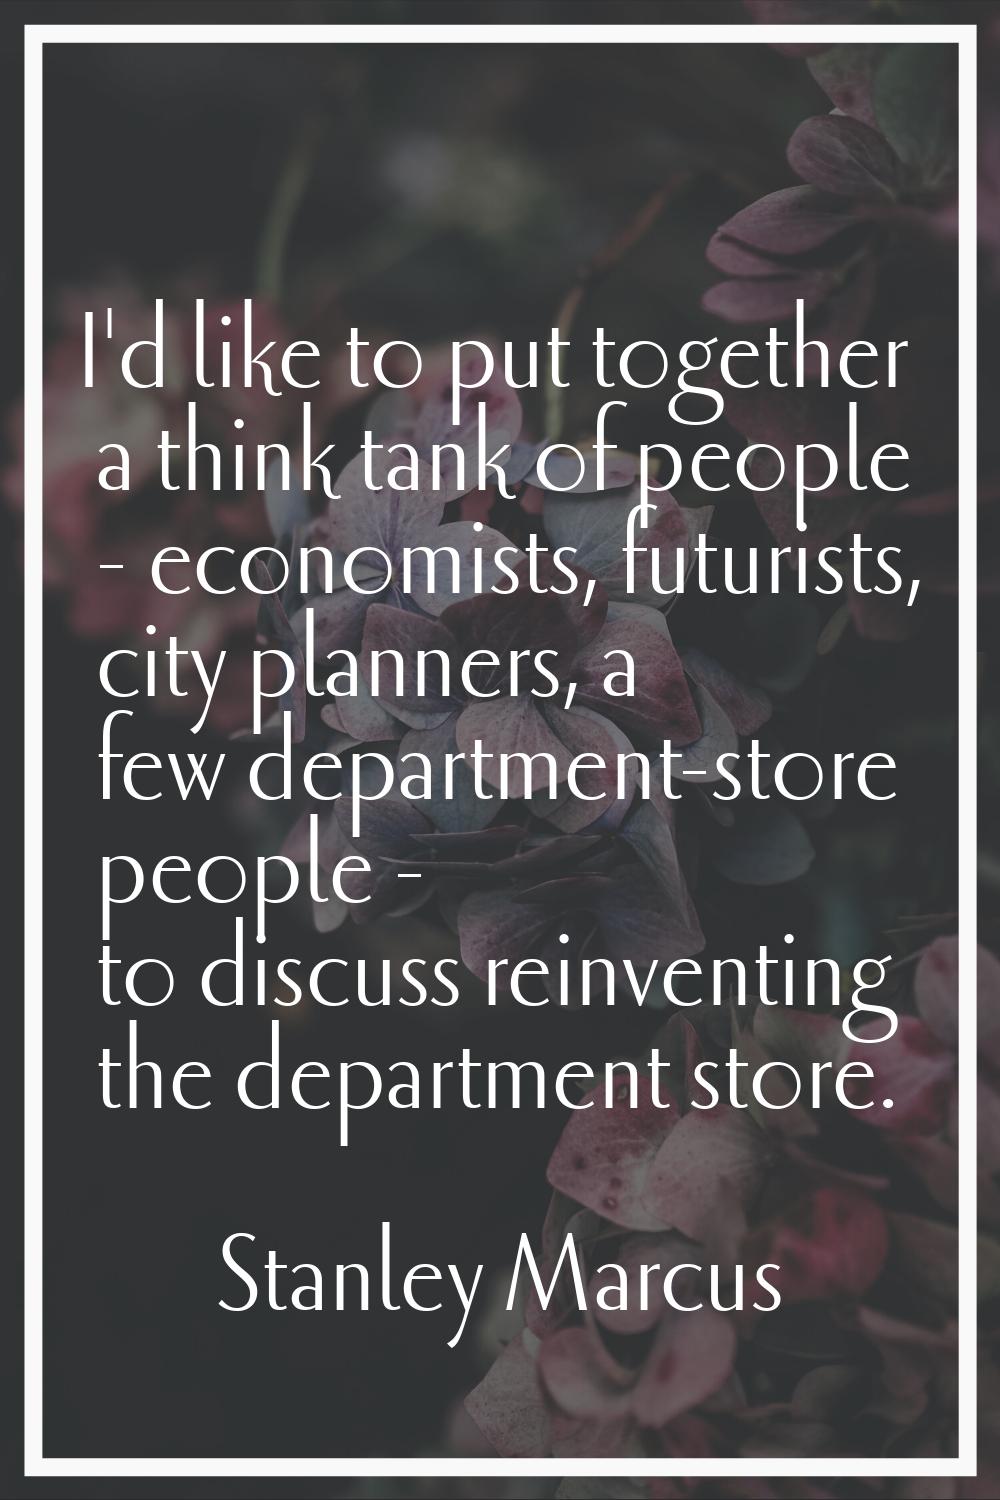 I'd like to put together a think tank of people - economists, futurists, city planners, a few depar